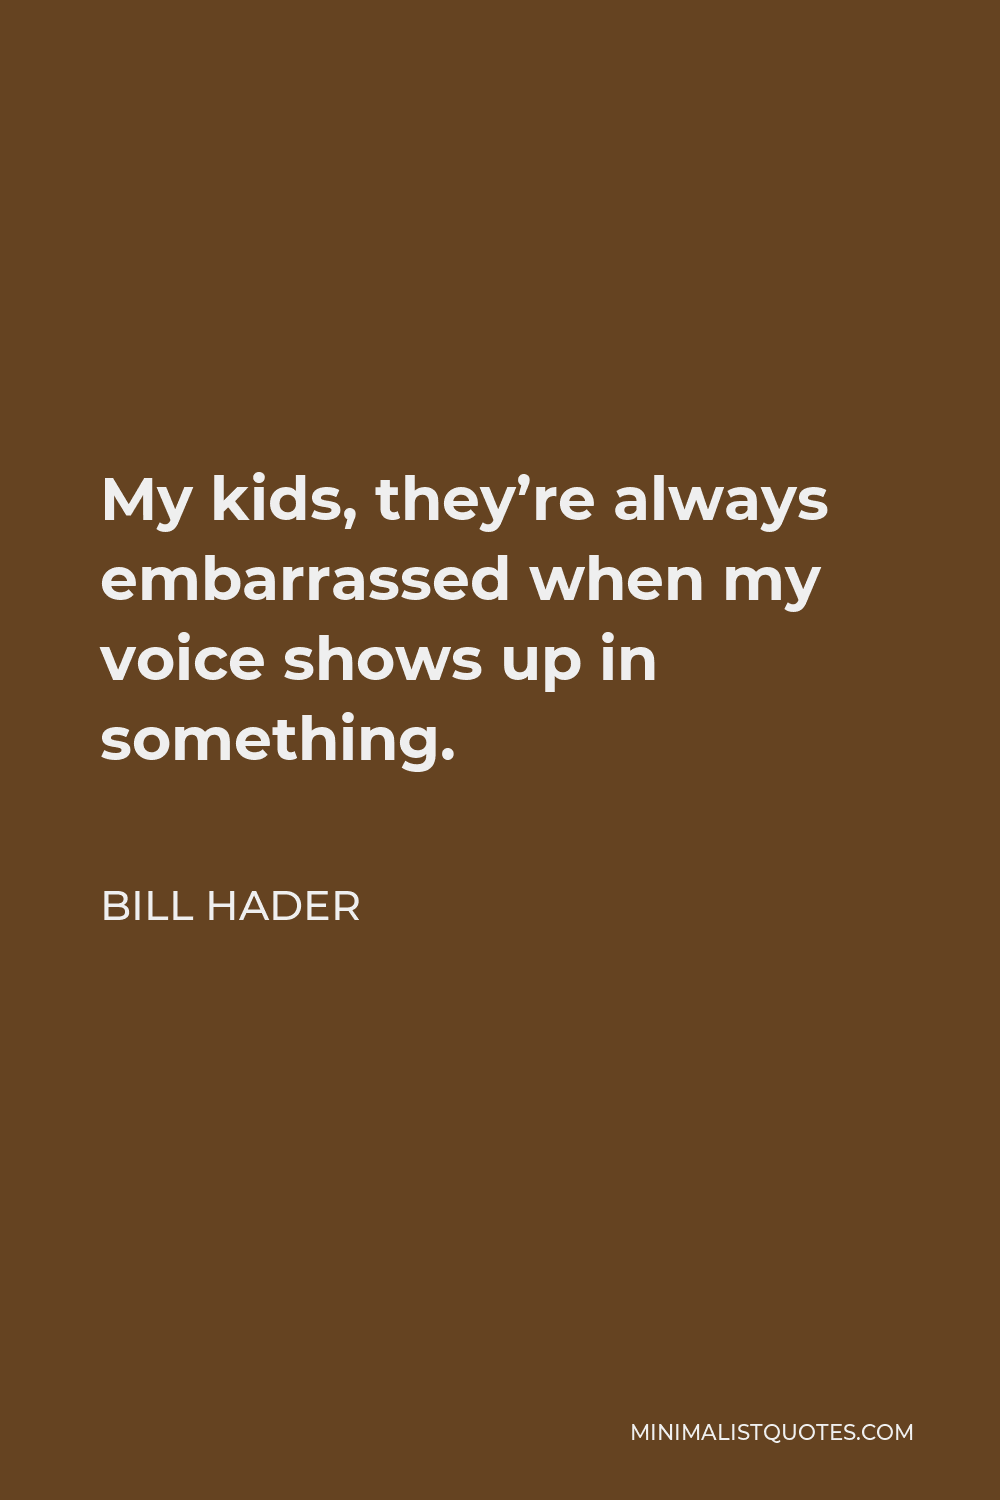 Bill Hader Quote - My kids, they’re always embarrassed when my voice shows up in something.